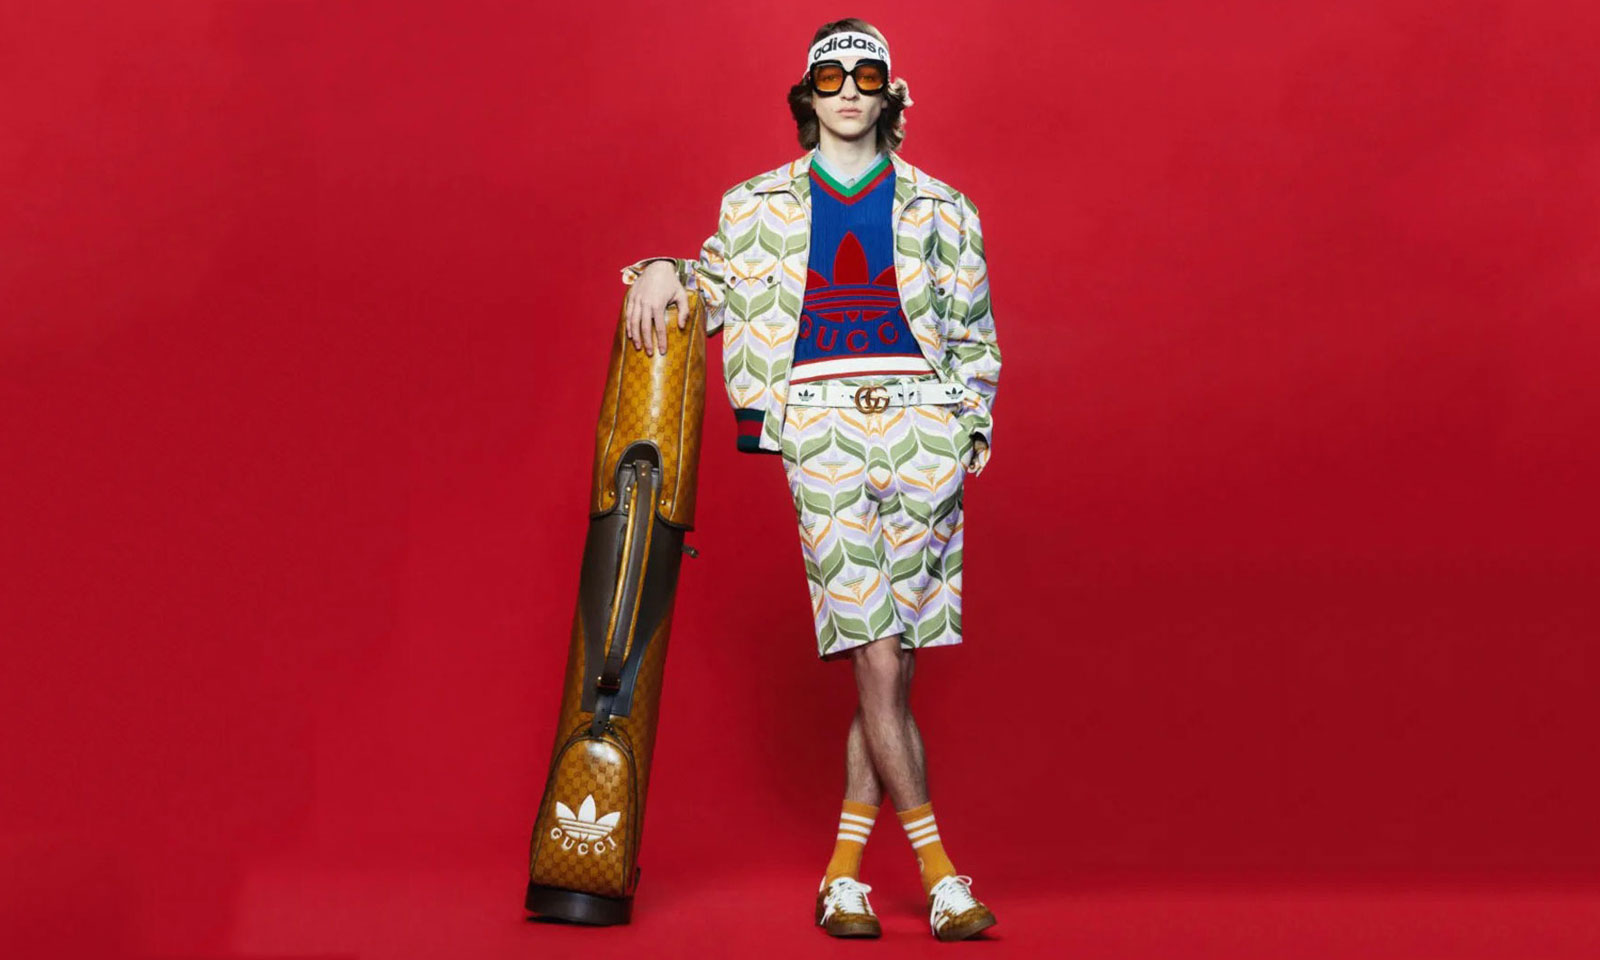 A-Look-At-Adidas-x-Gucci-Capsule-Collection-2-1